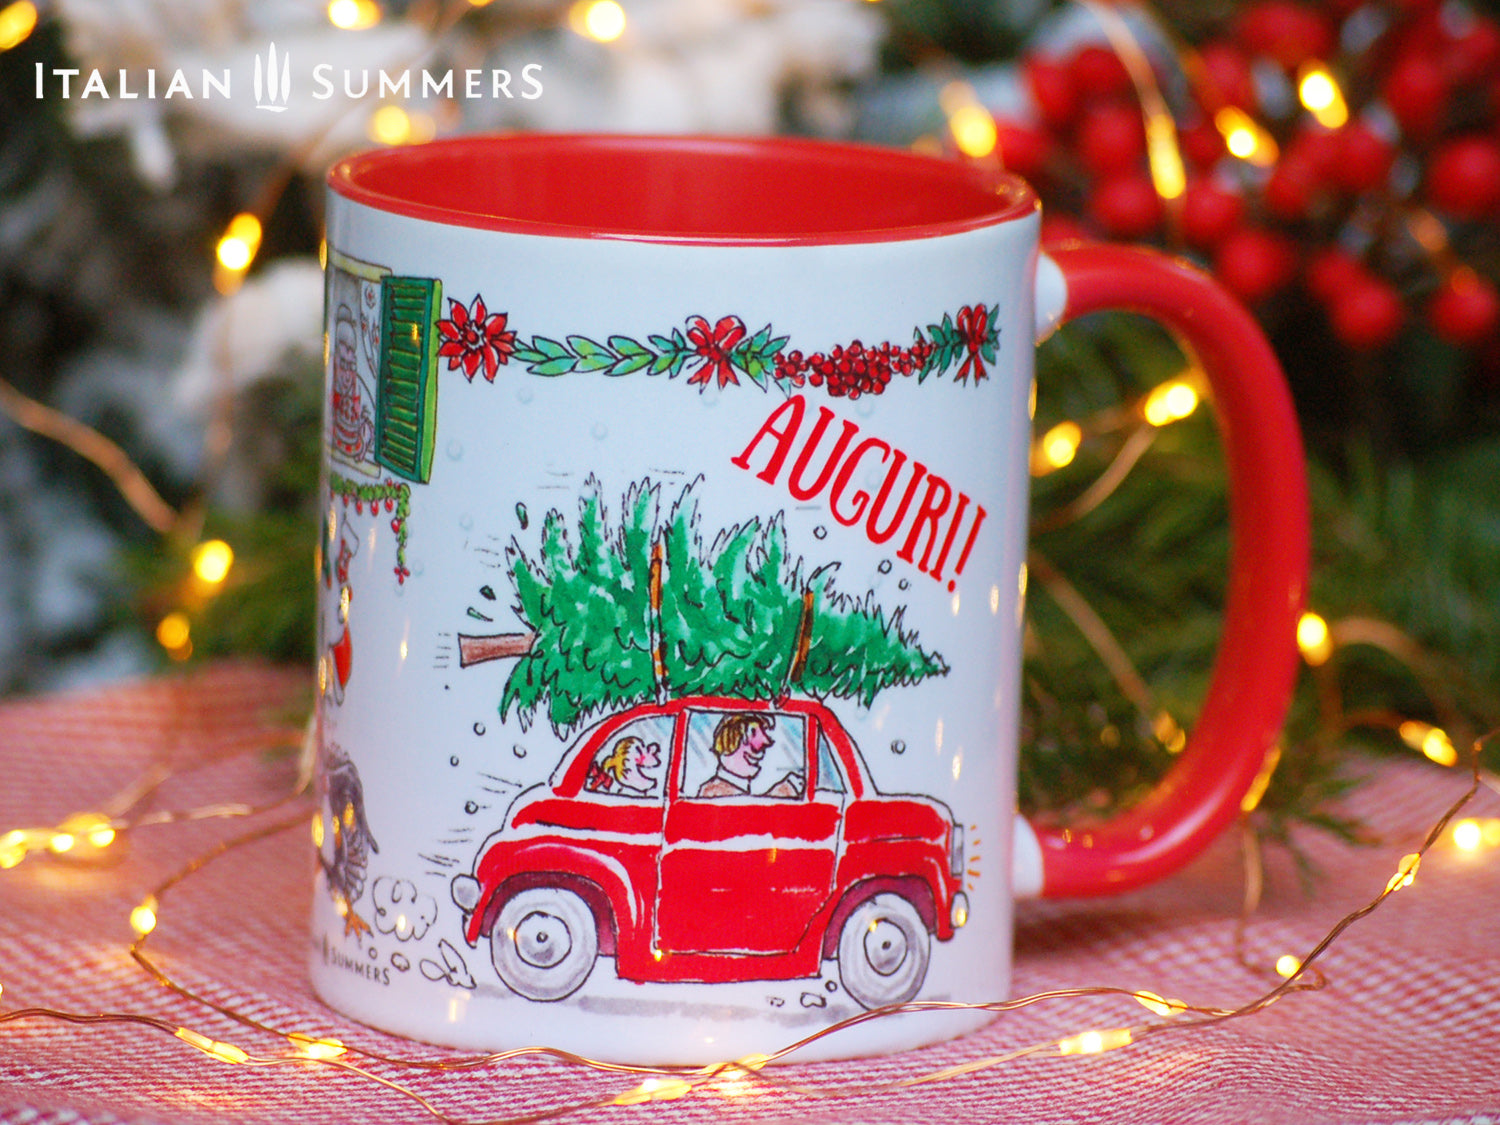 This Italy-inspired ceramic Christmas mug features the print of a merry trio of Italian cats singing carols on a vintage Vespa as they speed through an Italian street. A cute vintage red Fiat500 car zooms in the opposite direction with a Christmas tree on the roof!